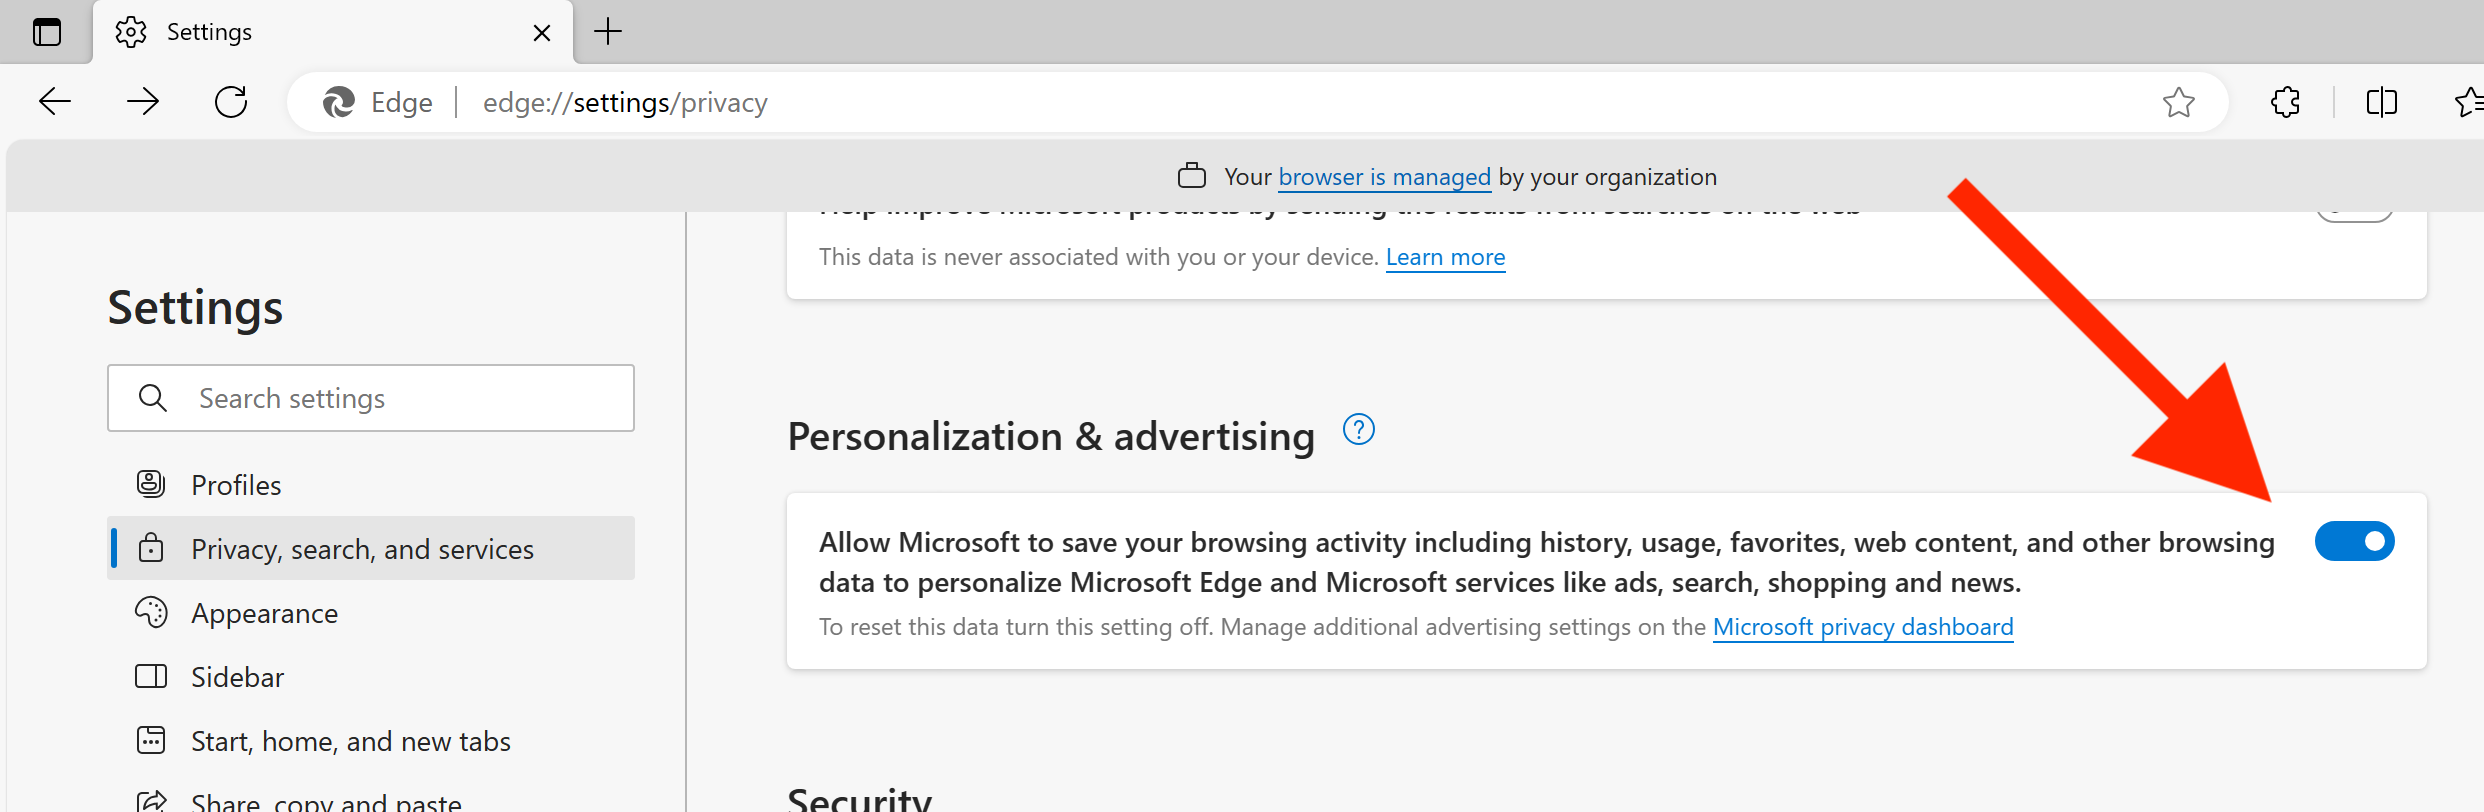 Turning off personalization setting in Edge